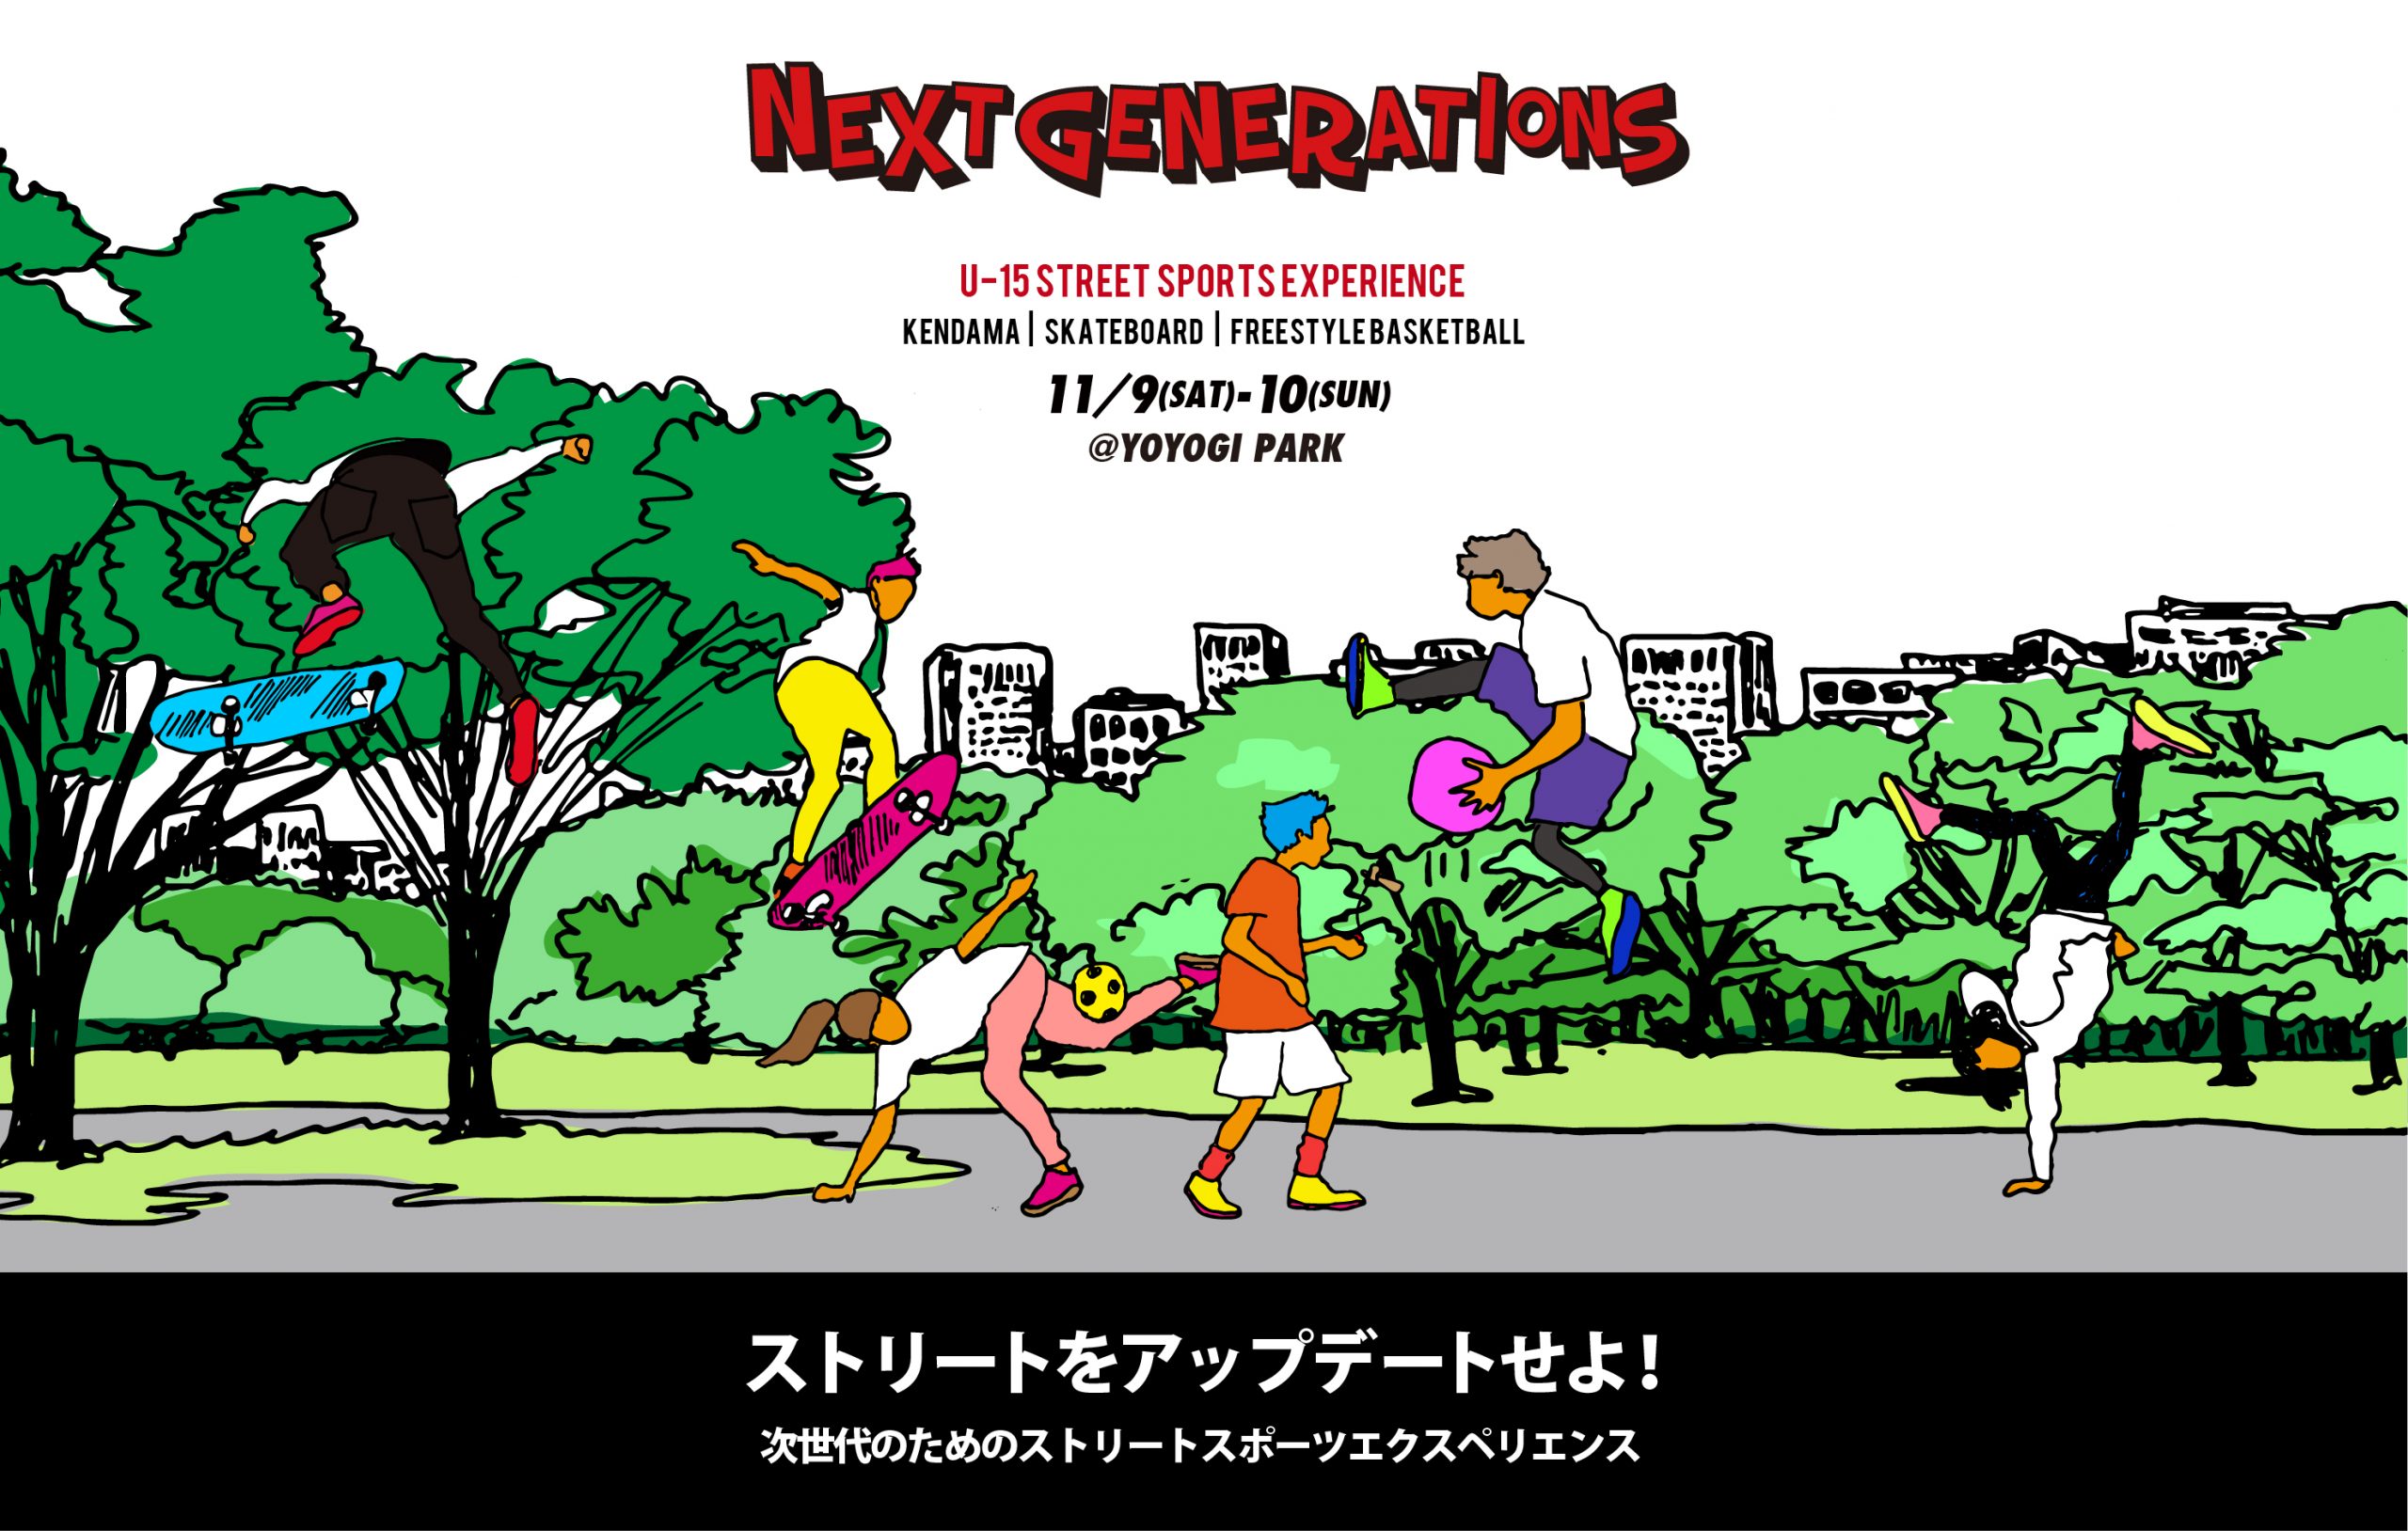 "NEXT GENERATIONS" will be held on November 9-10 Kendama Competition and Skateboard & Freestyle Basketball Workshop